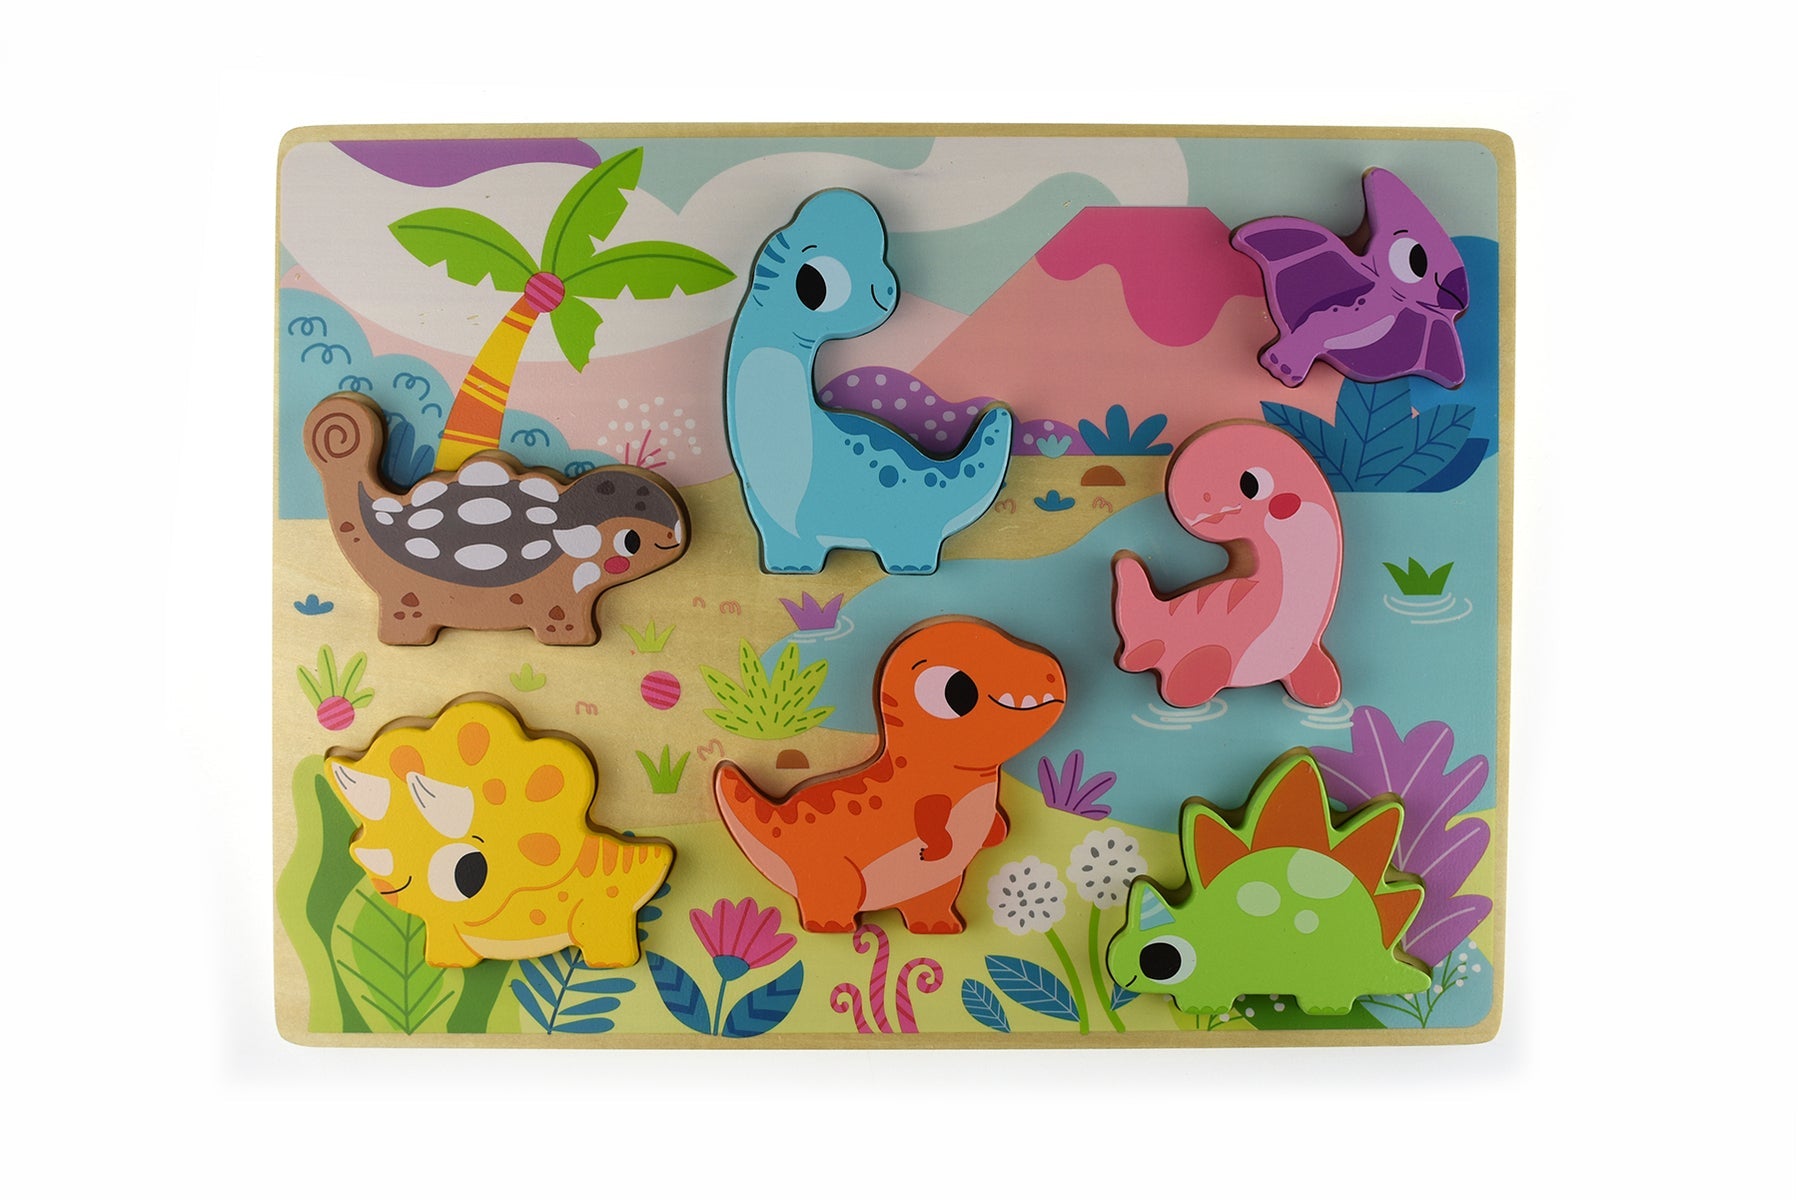 Tooky Toy Chunky Puzzle Dinosaur: Fun Wooden Jigsaw for Kids